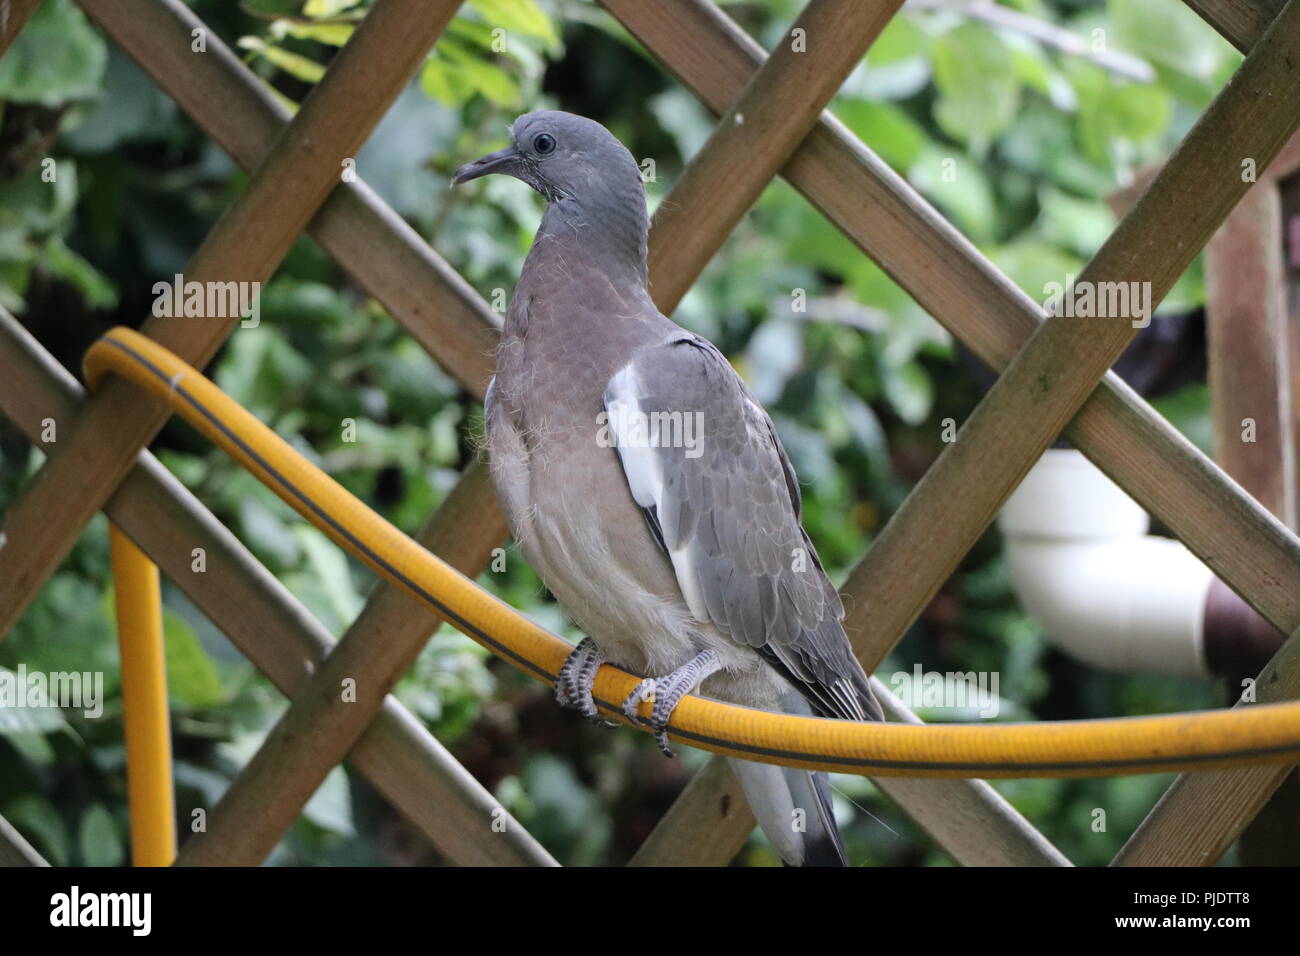 A Young Wood Pigeon Sat on a Hosepipe in a Garden under an Arbour. Stock Photo